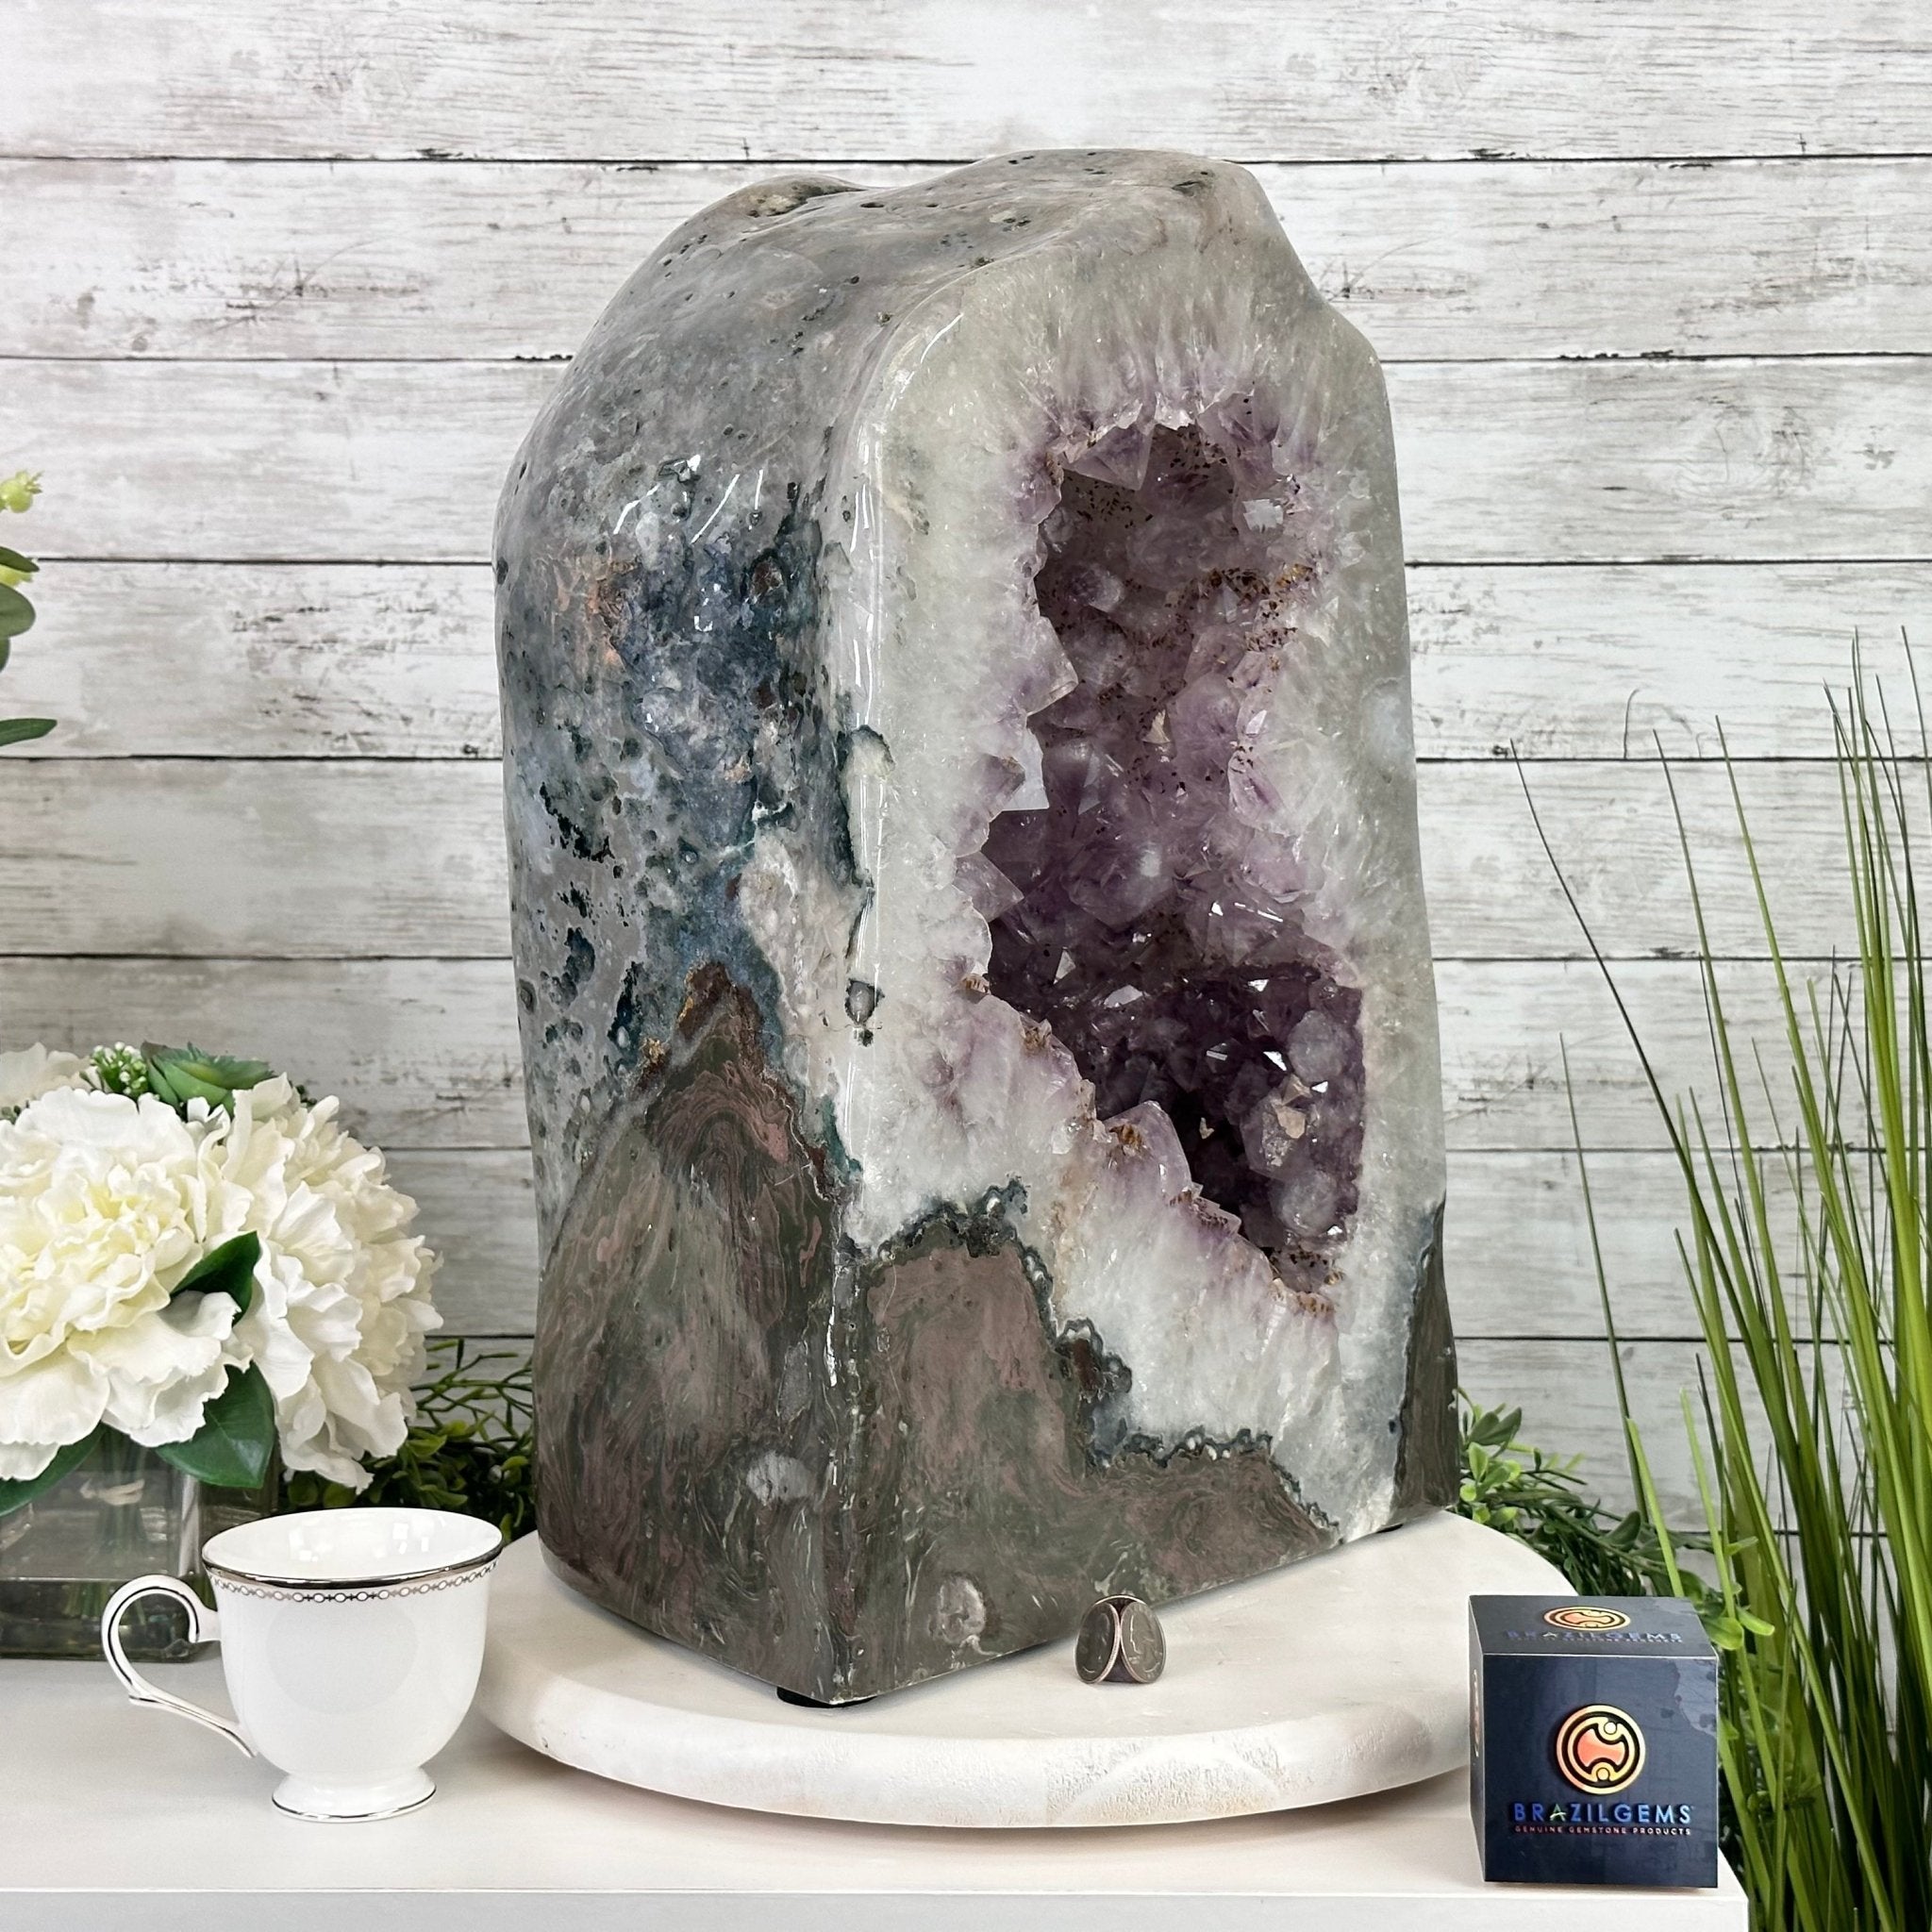 Extra Quality Polished Brazilian Amethyst Cathedral, 103.3 lbs & 18.9" tall Model #5602-0199 by Brazil Gems - Brazil GemsBrazil GemsExtra Quality Polished Brazilian Amethyst Cathedral, 103.3 lbs & 18.9" tall Model #5602-0199 by Brazil GemsPolished Cathedrals5602-0199